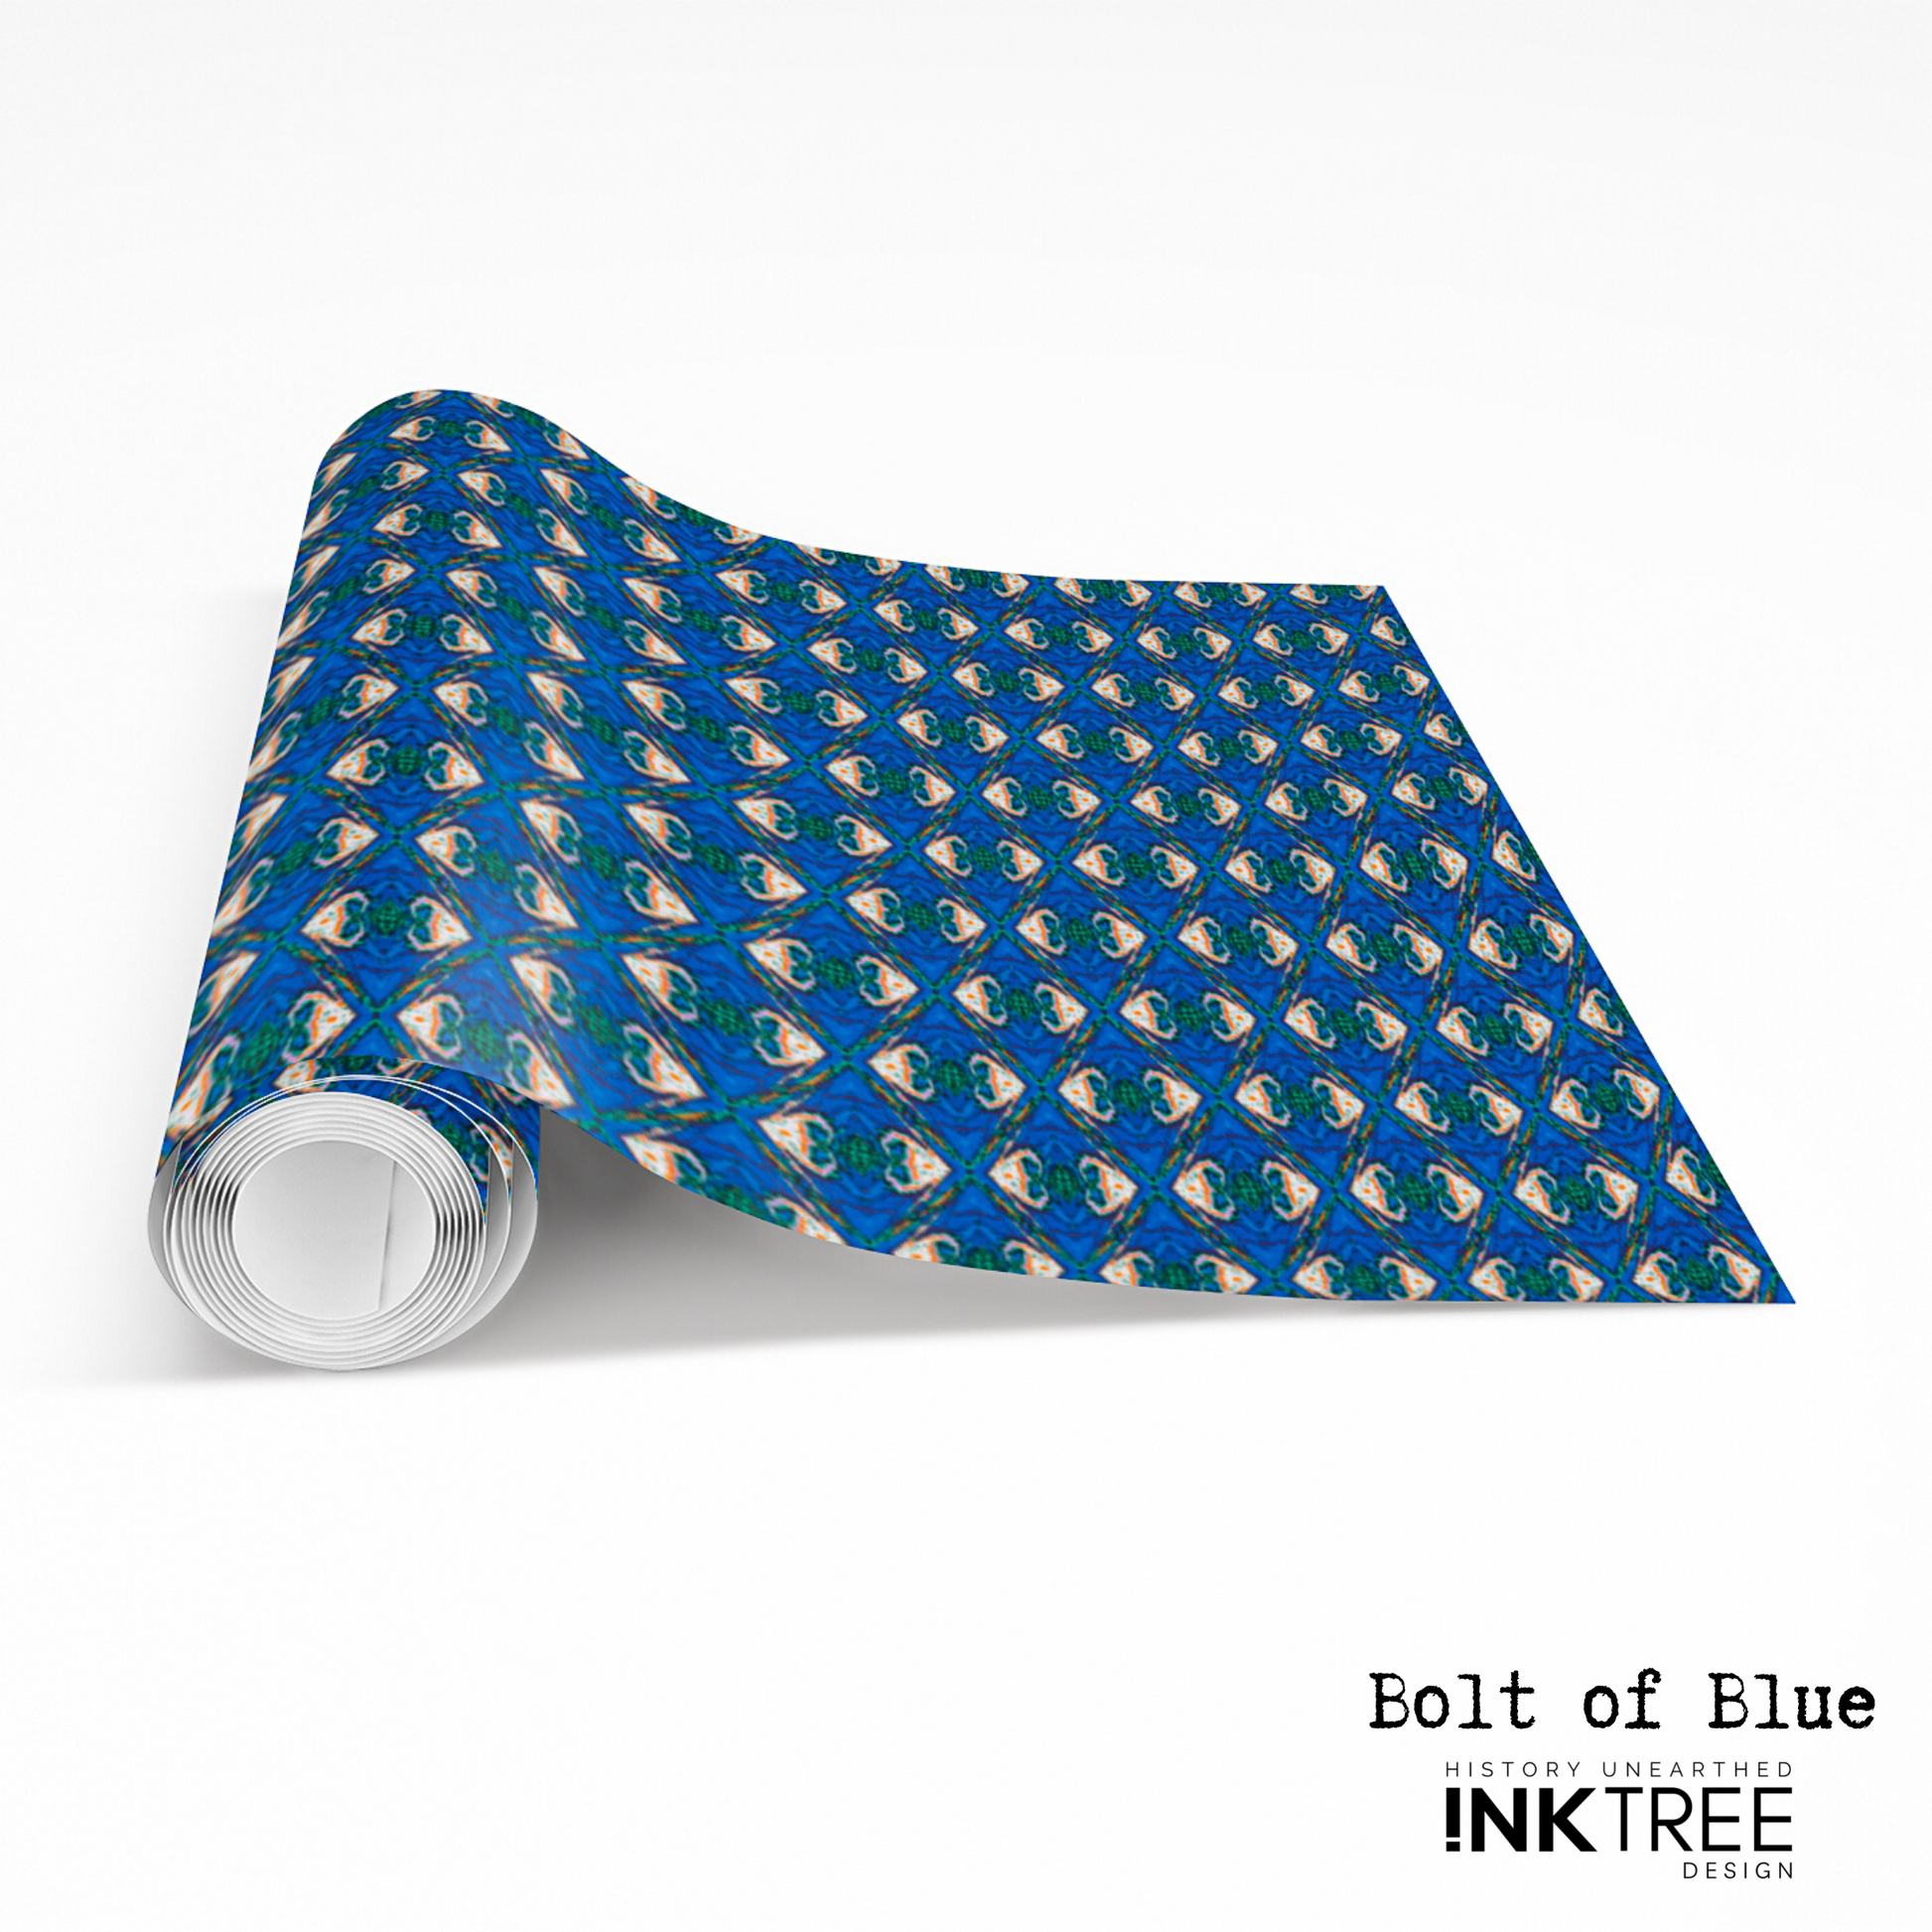 A roll of wrapping paper with an orange, white, black, blue and green pattern.